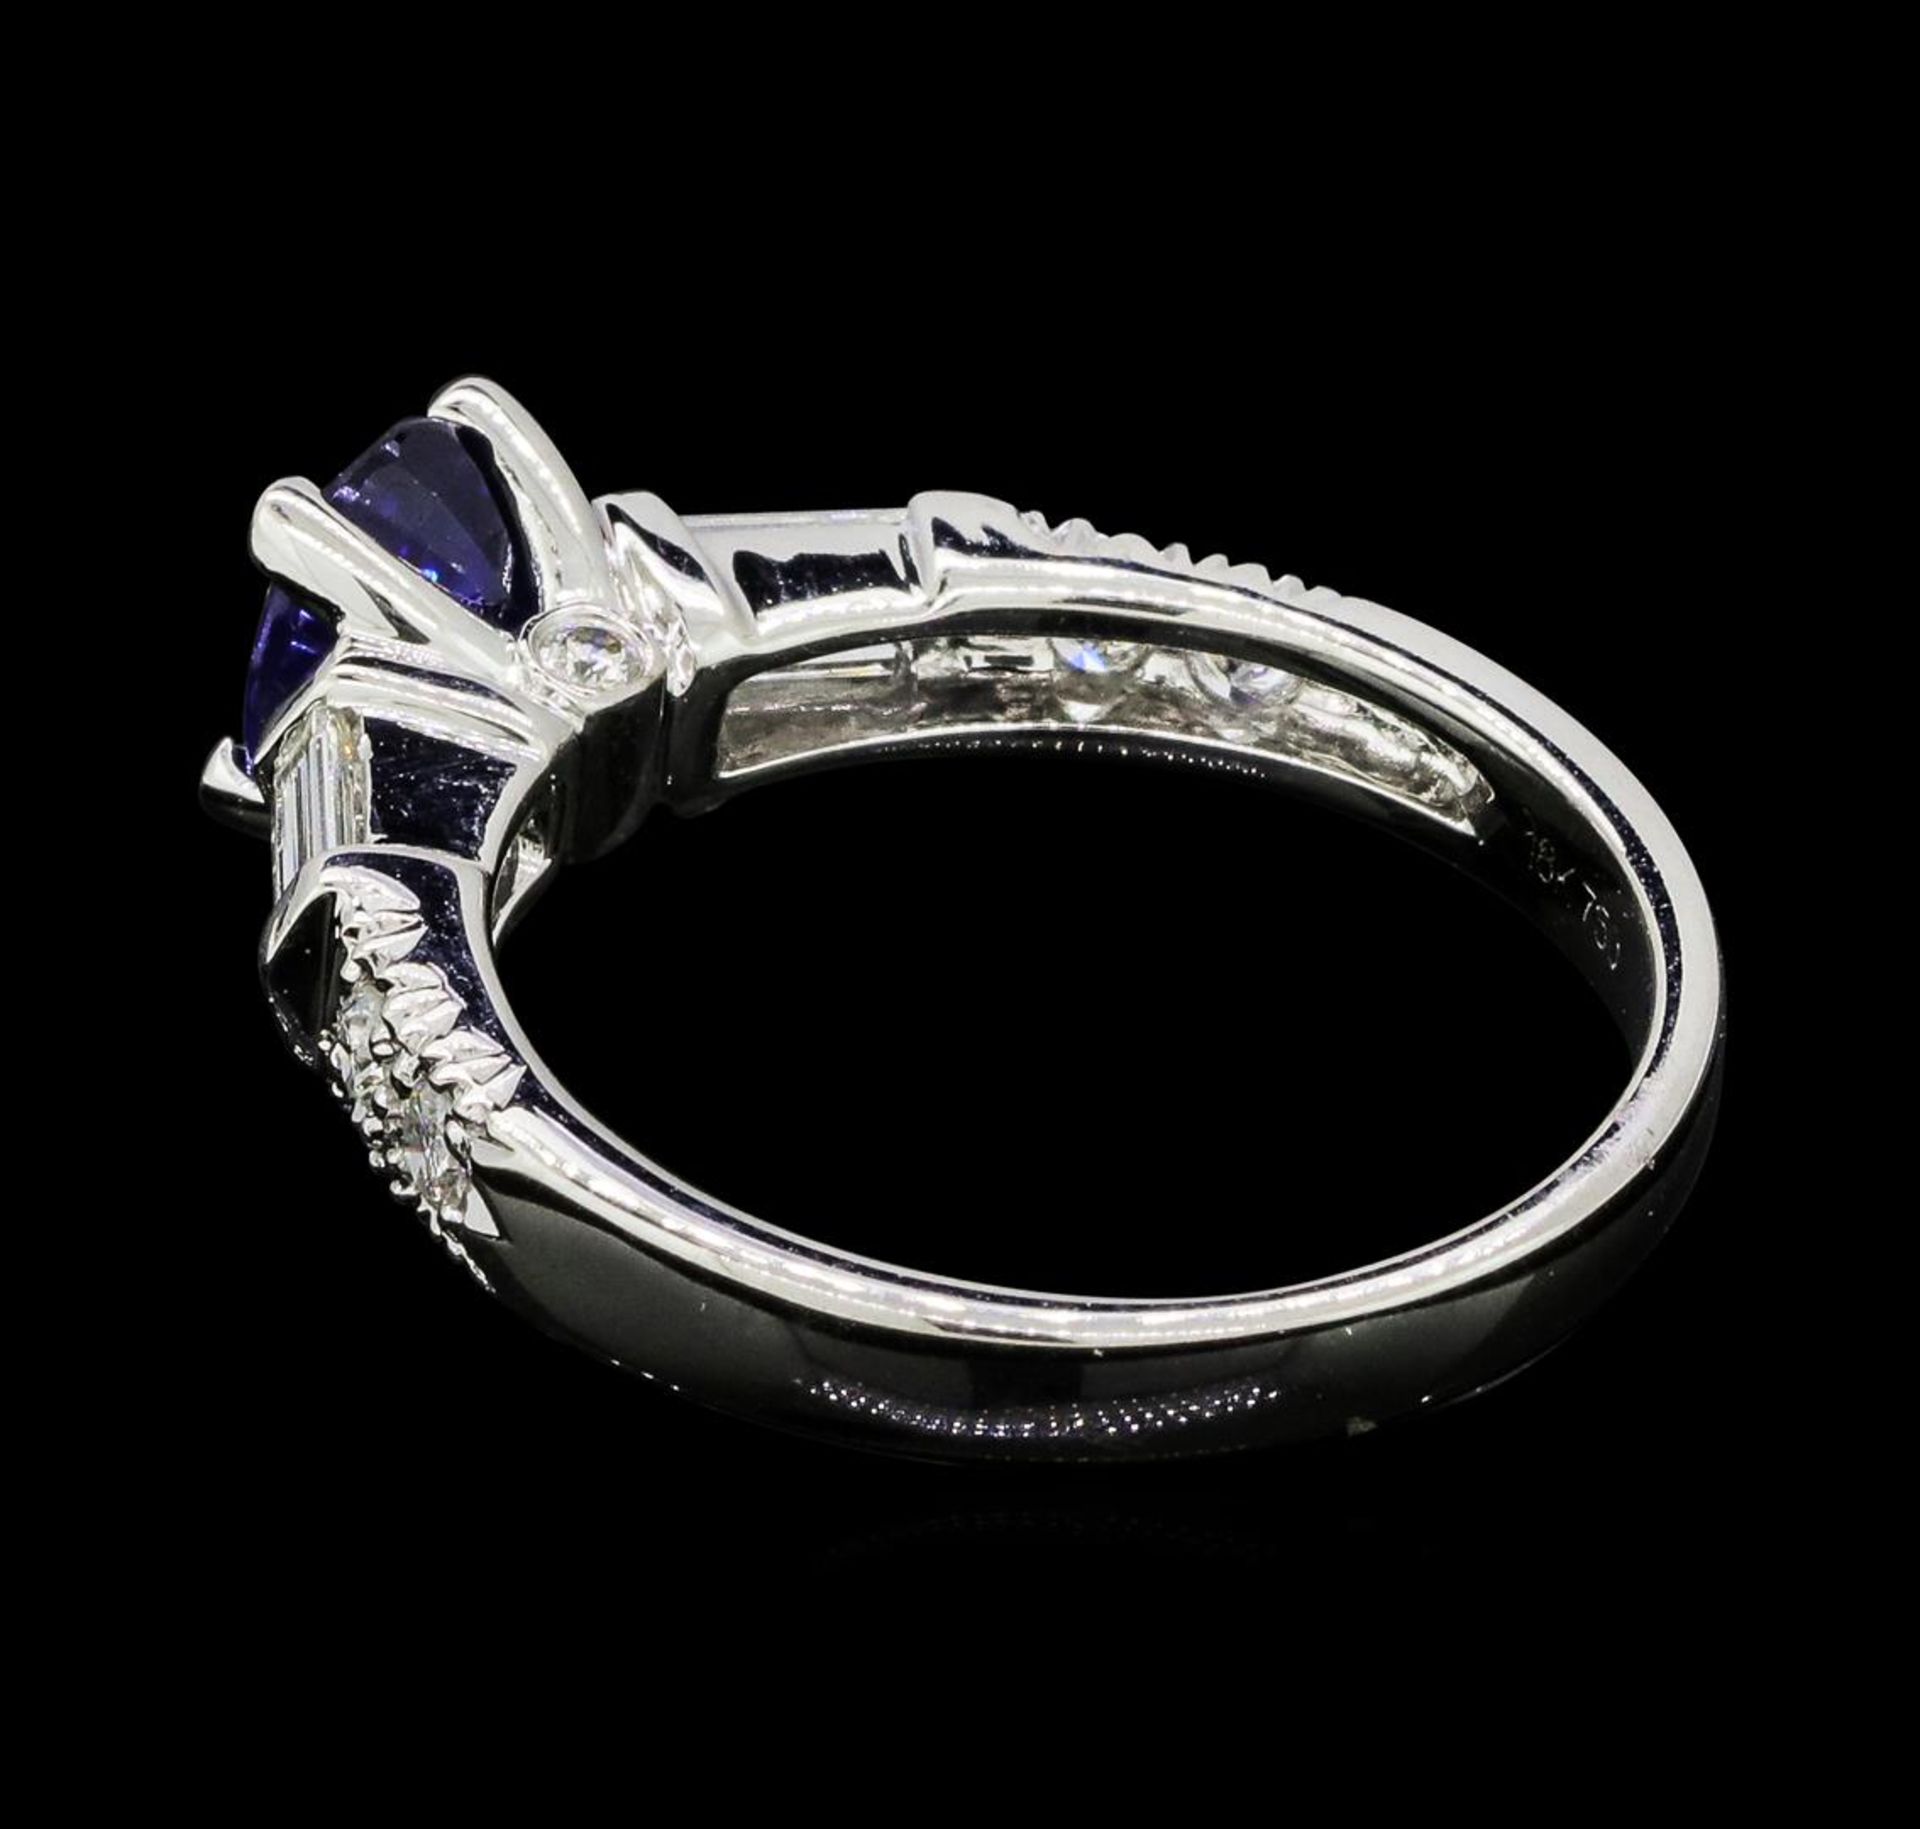 1.00 ctw Sapphire and Diamond Ring - 18KT White Gold - Image 3 of 4